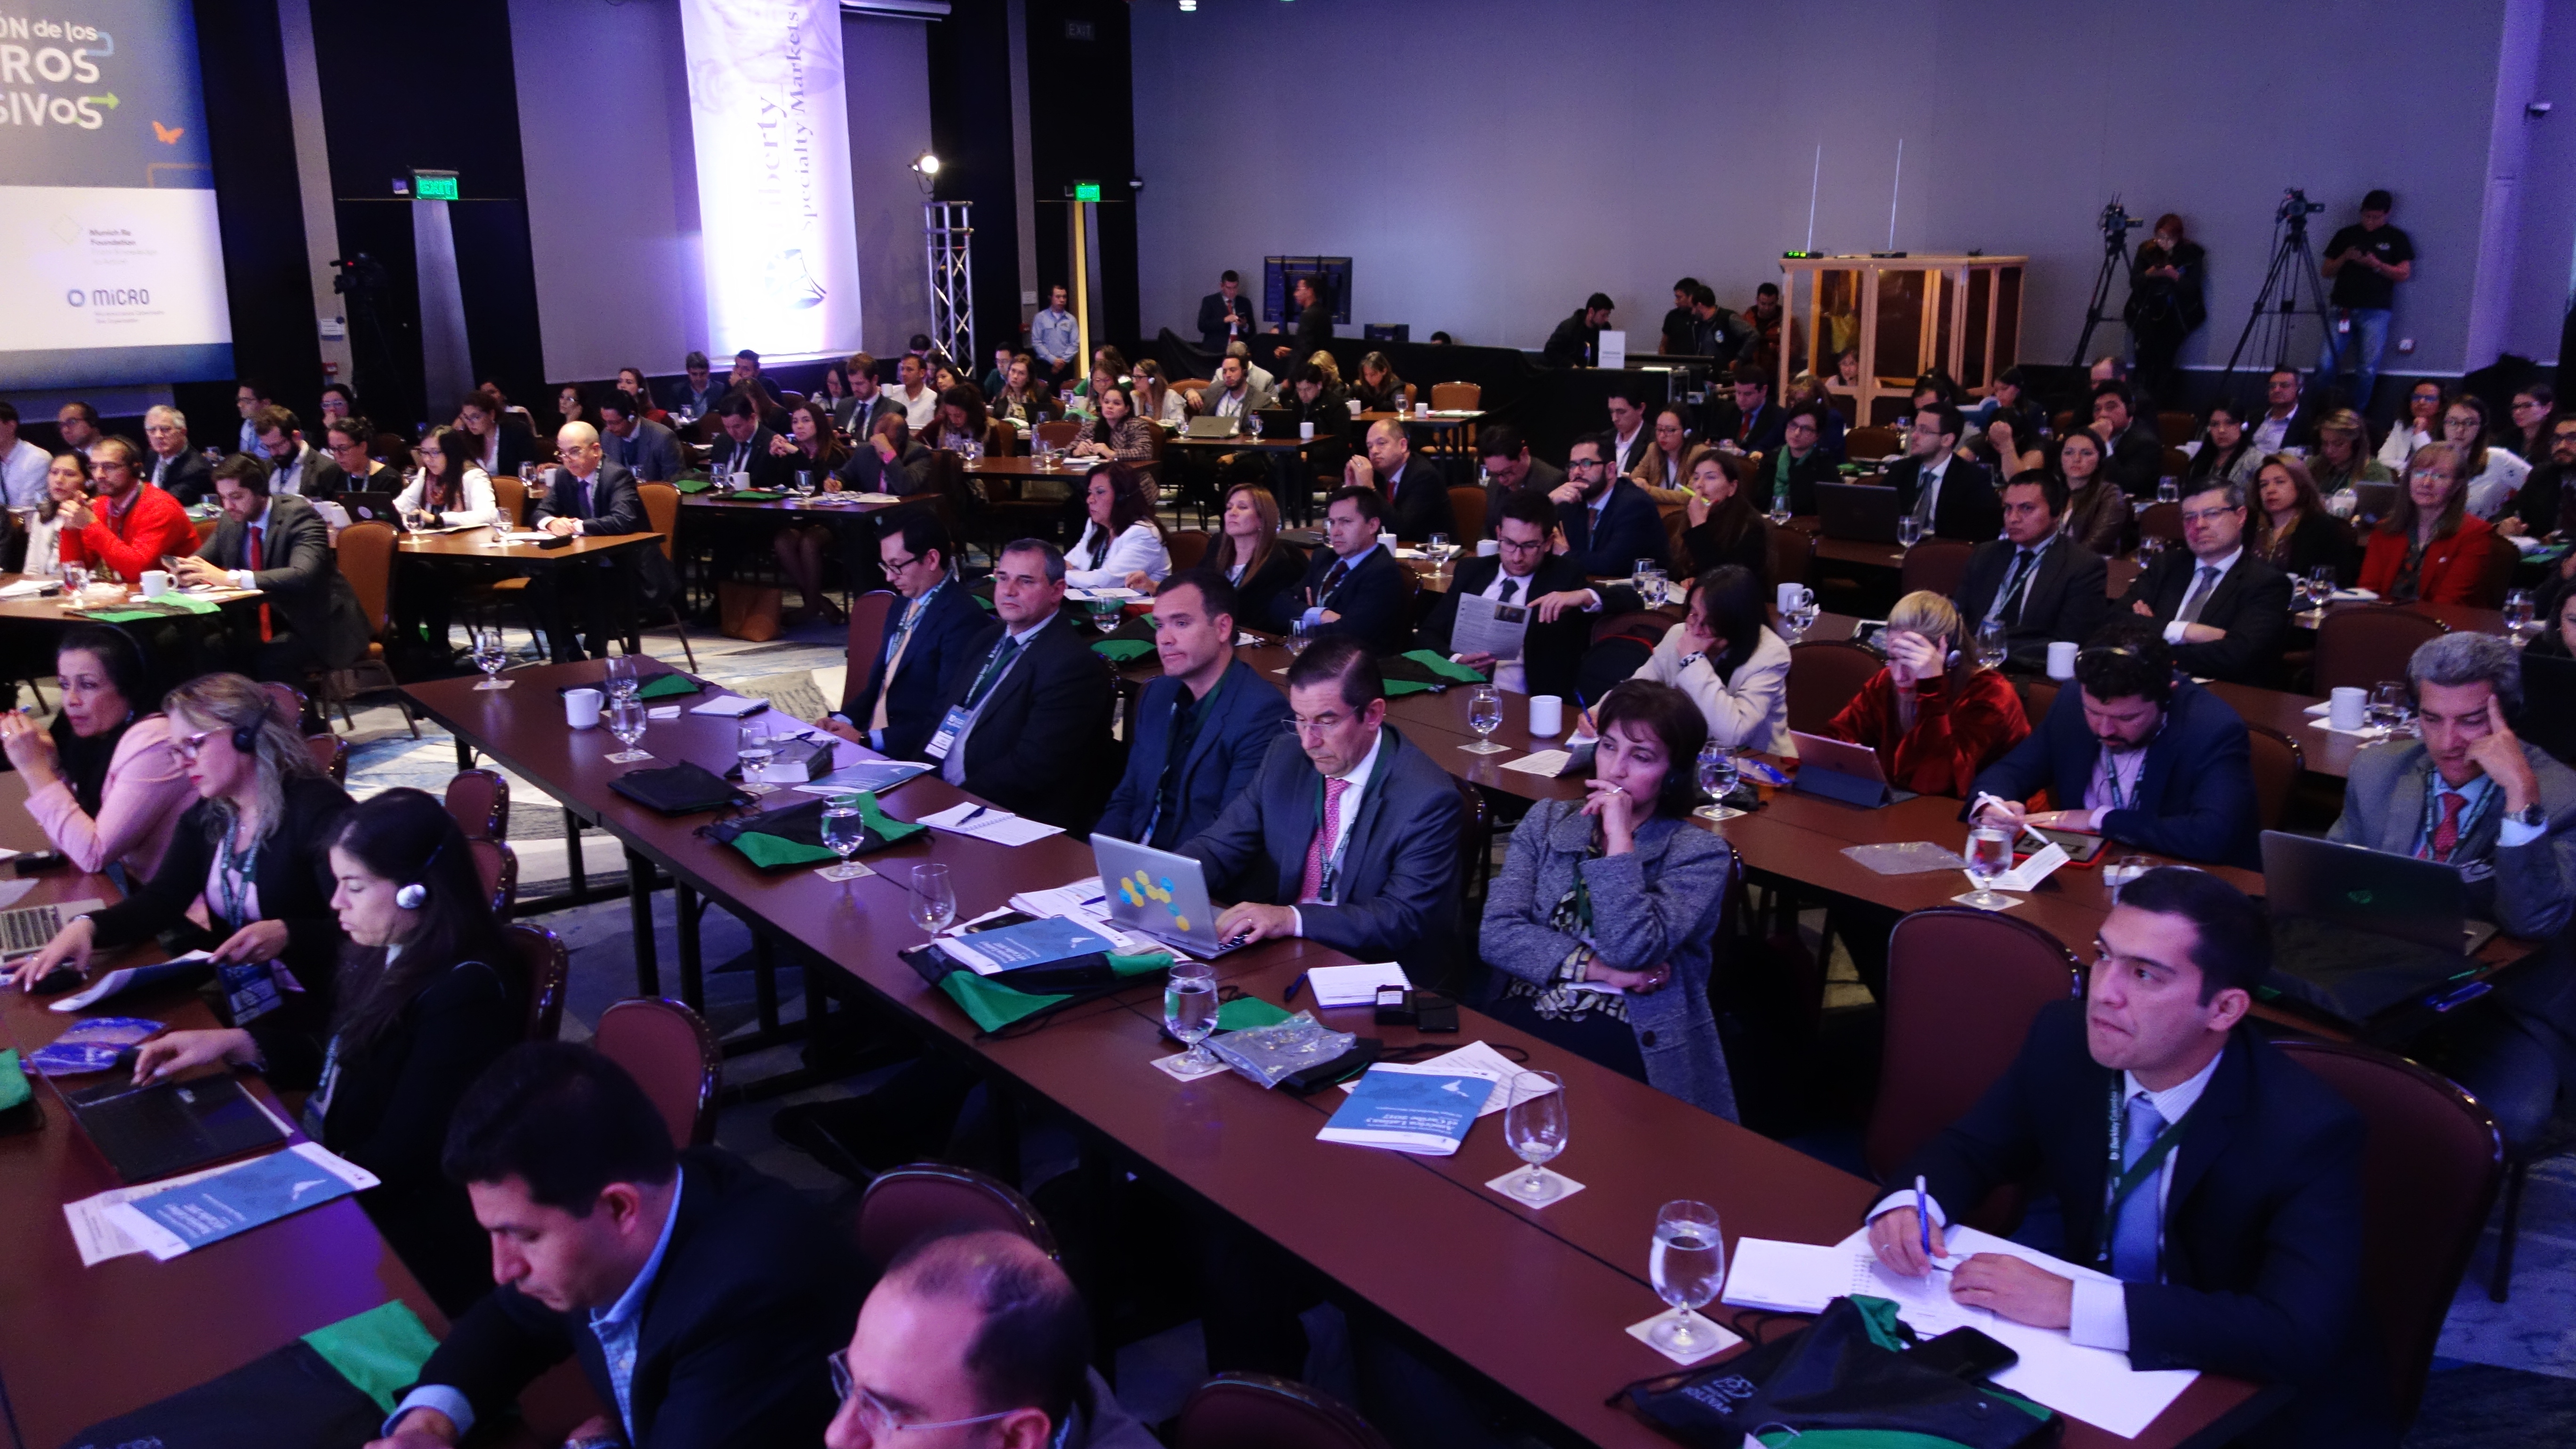 Around 150 insurance experts participated in the Learning Session Colombia.